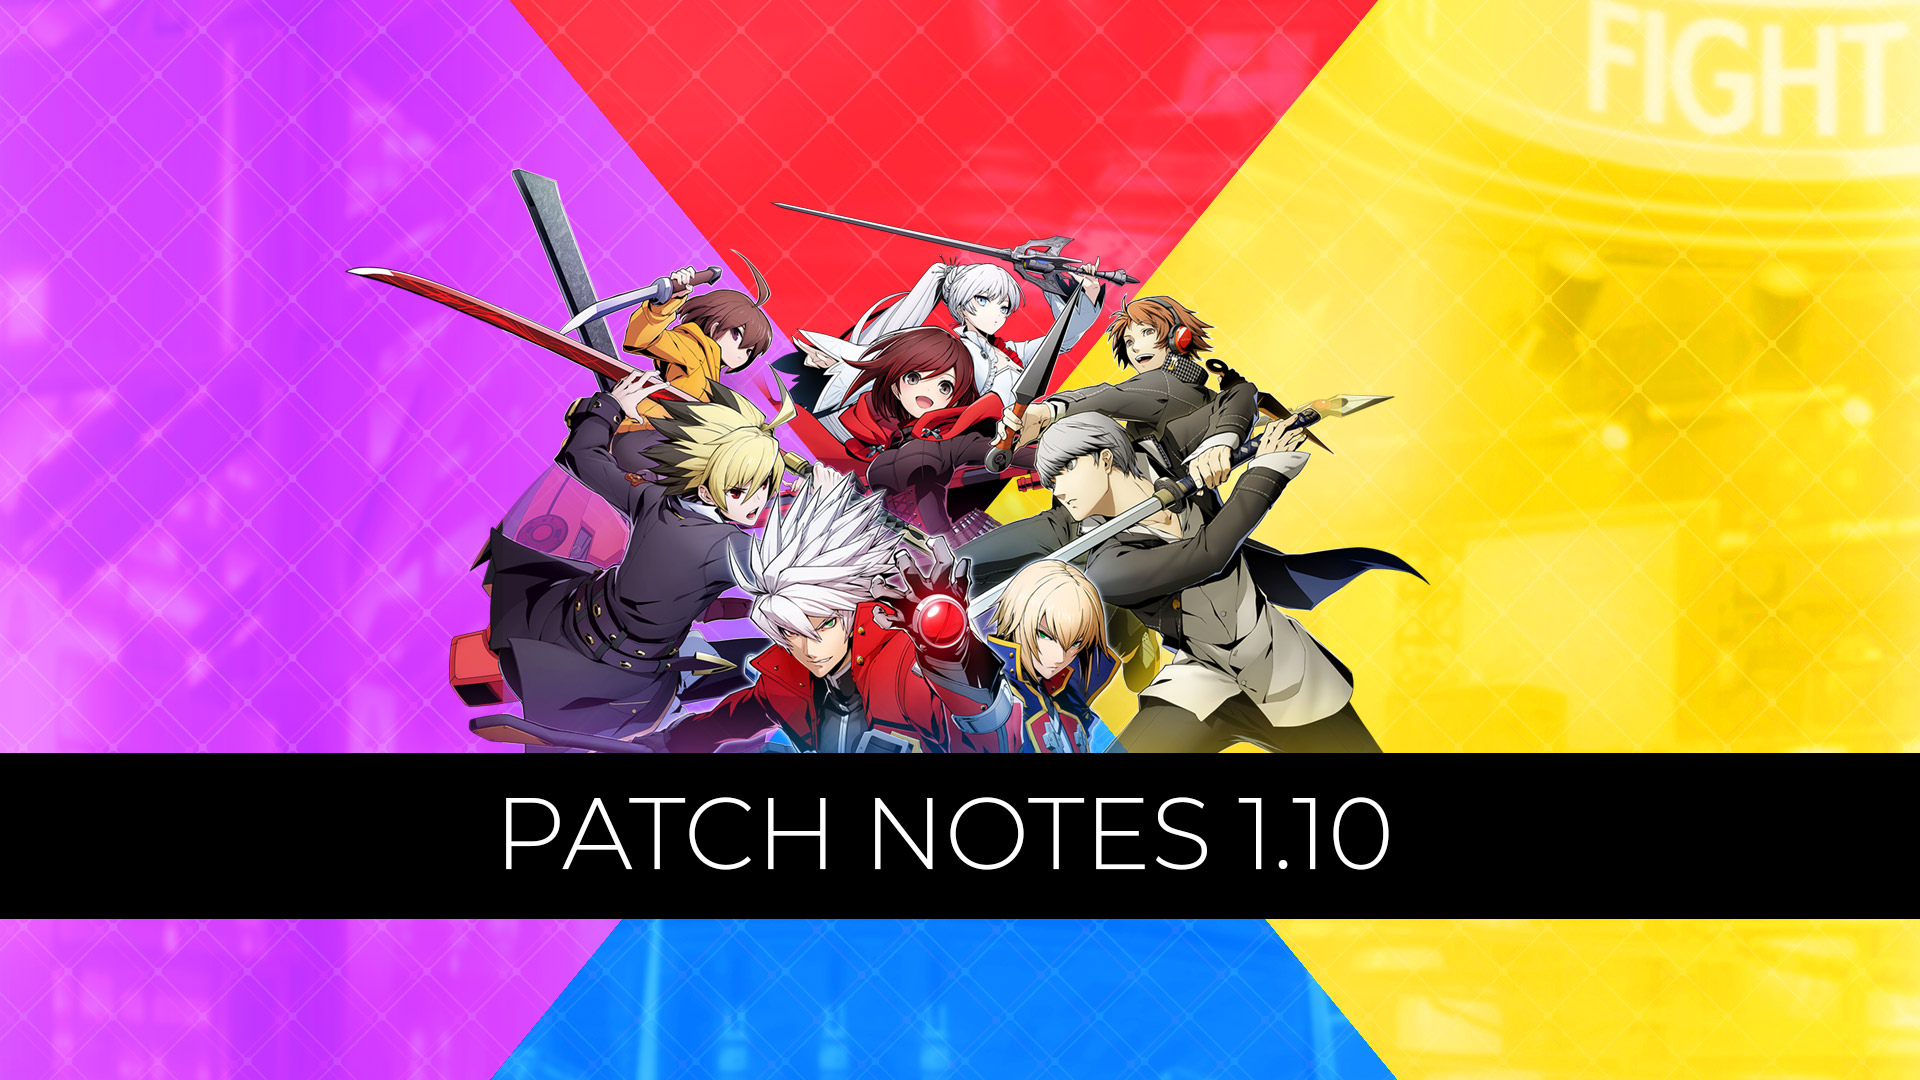 BlazBlue Cross Tag Battle Ver. 1.10 Patch Notes